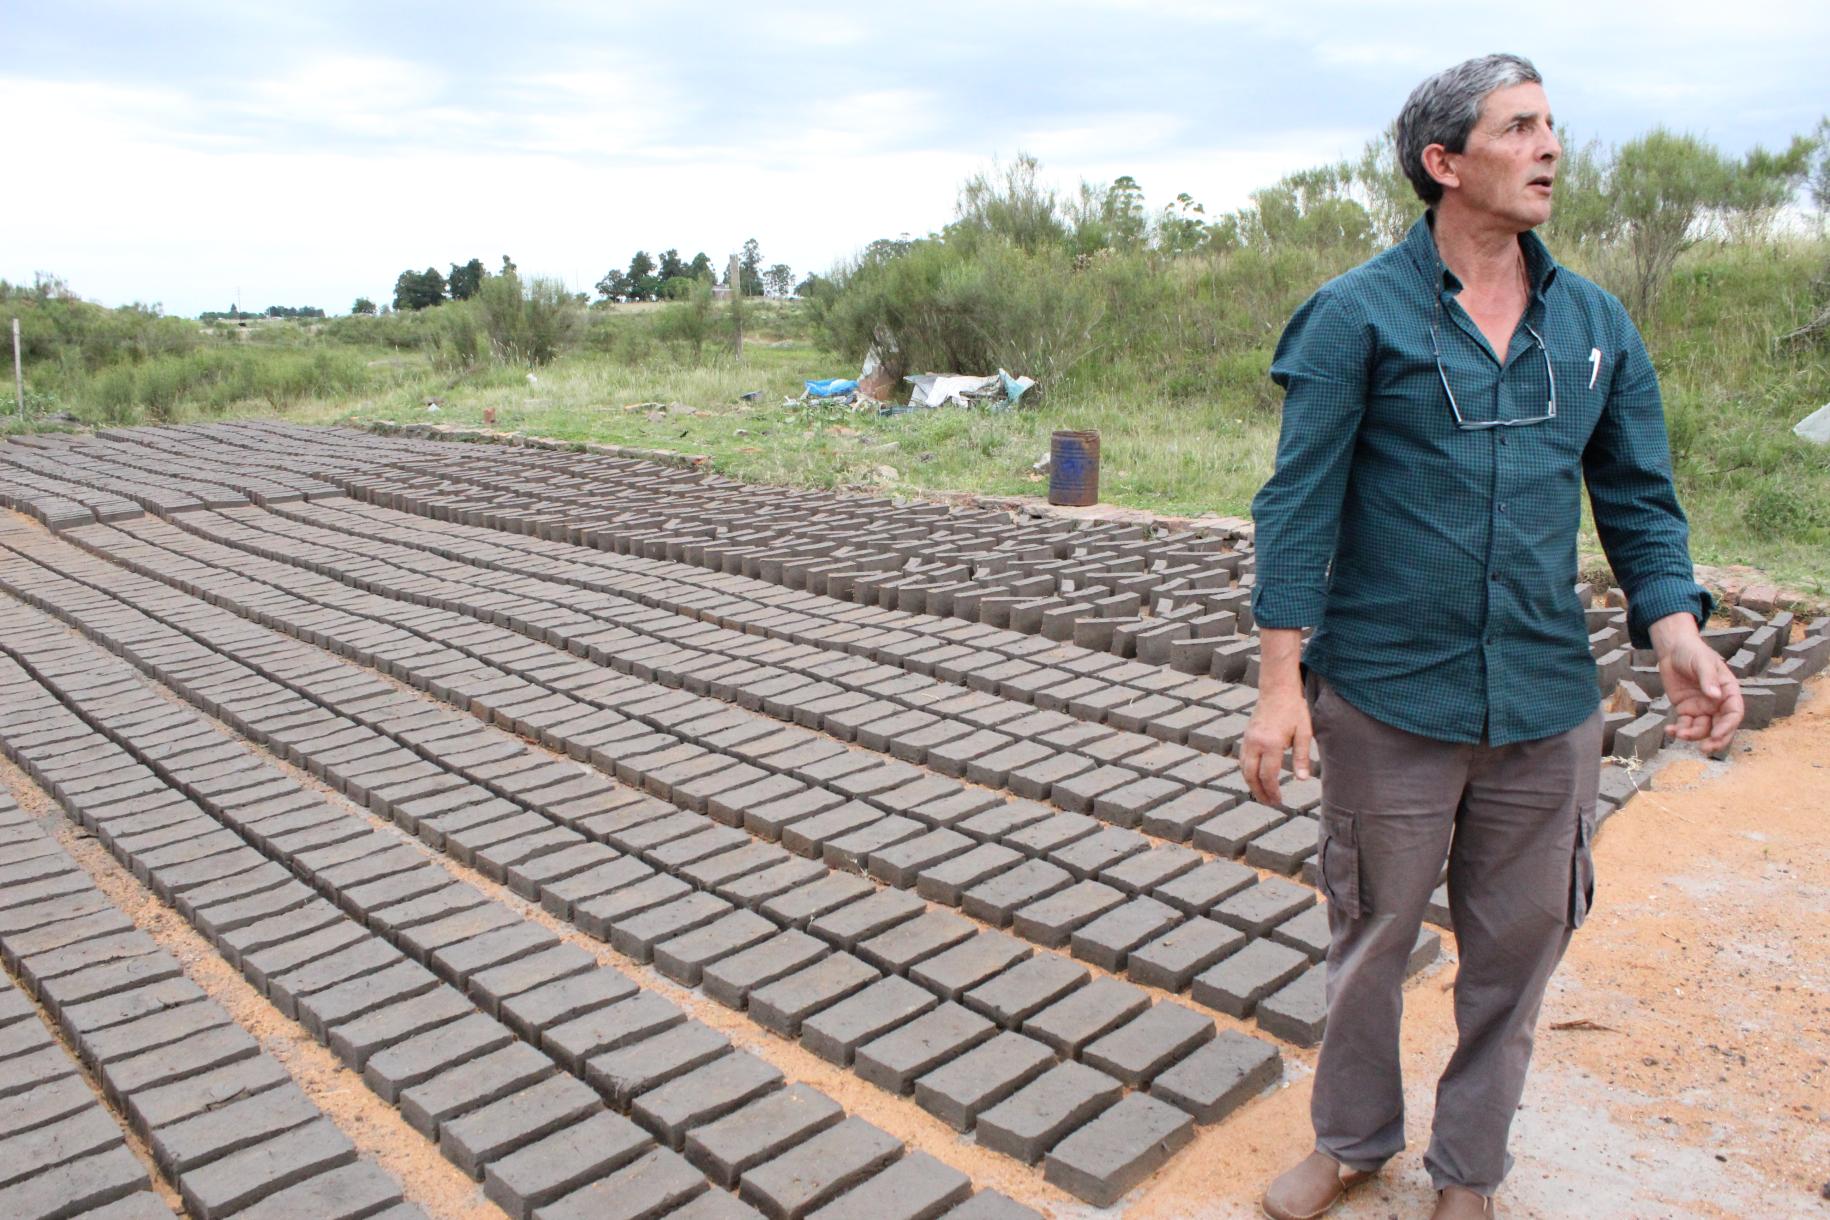 Eduard Romero stands in front of the bricks spread across the ground set under the sun to dry.